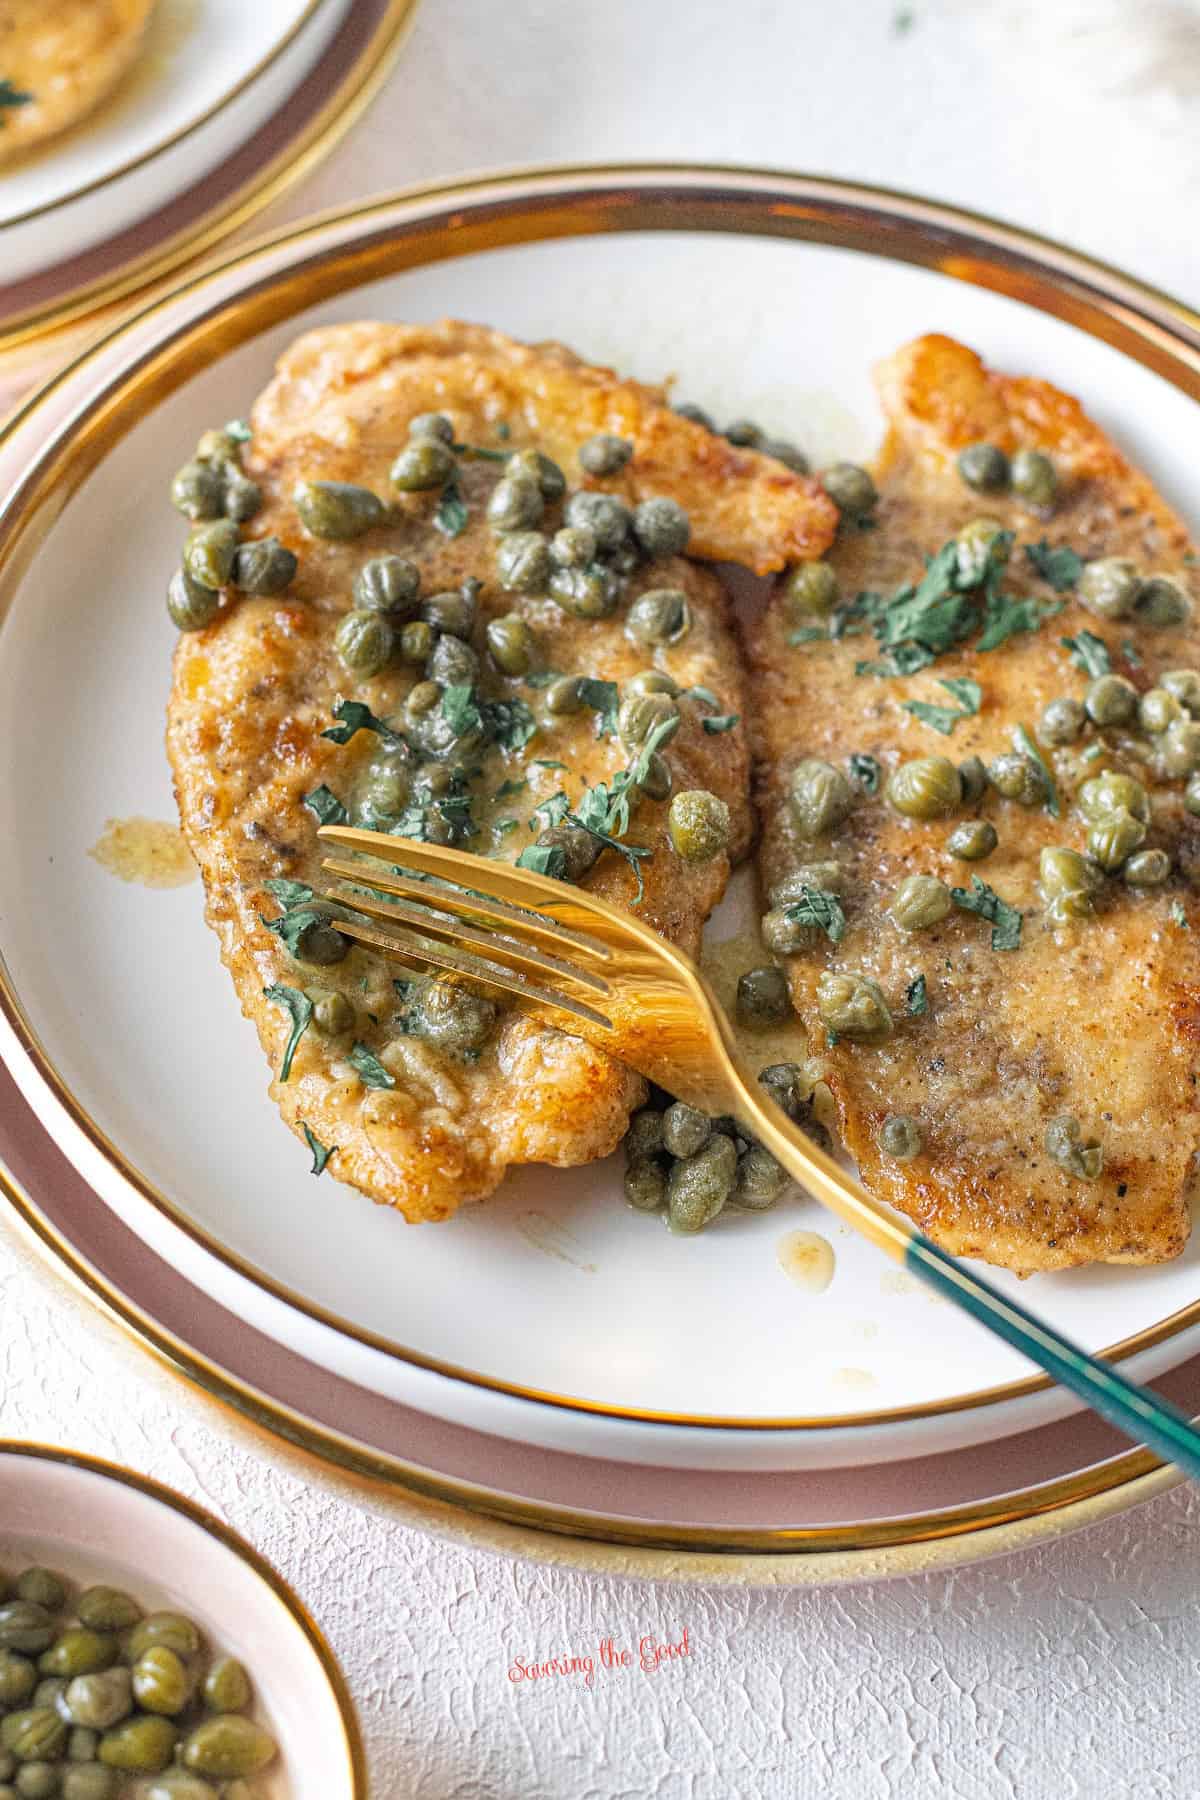 giada' chicken piccata on a plate with capers and parsley garnish.